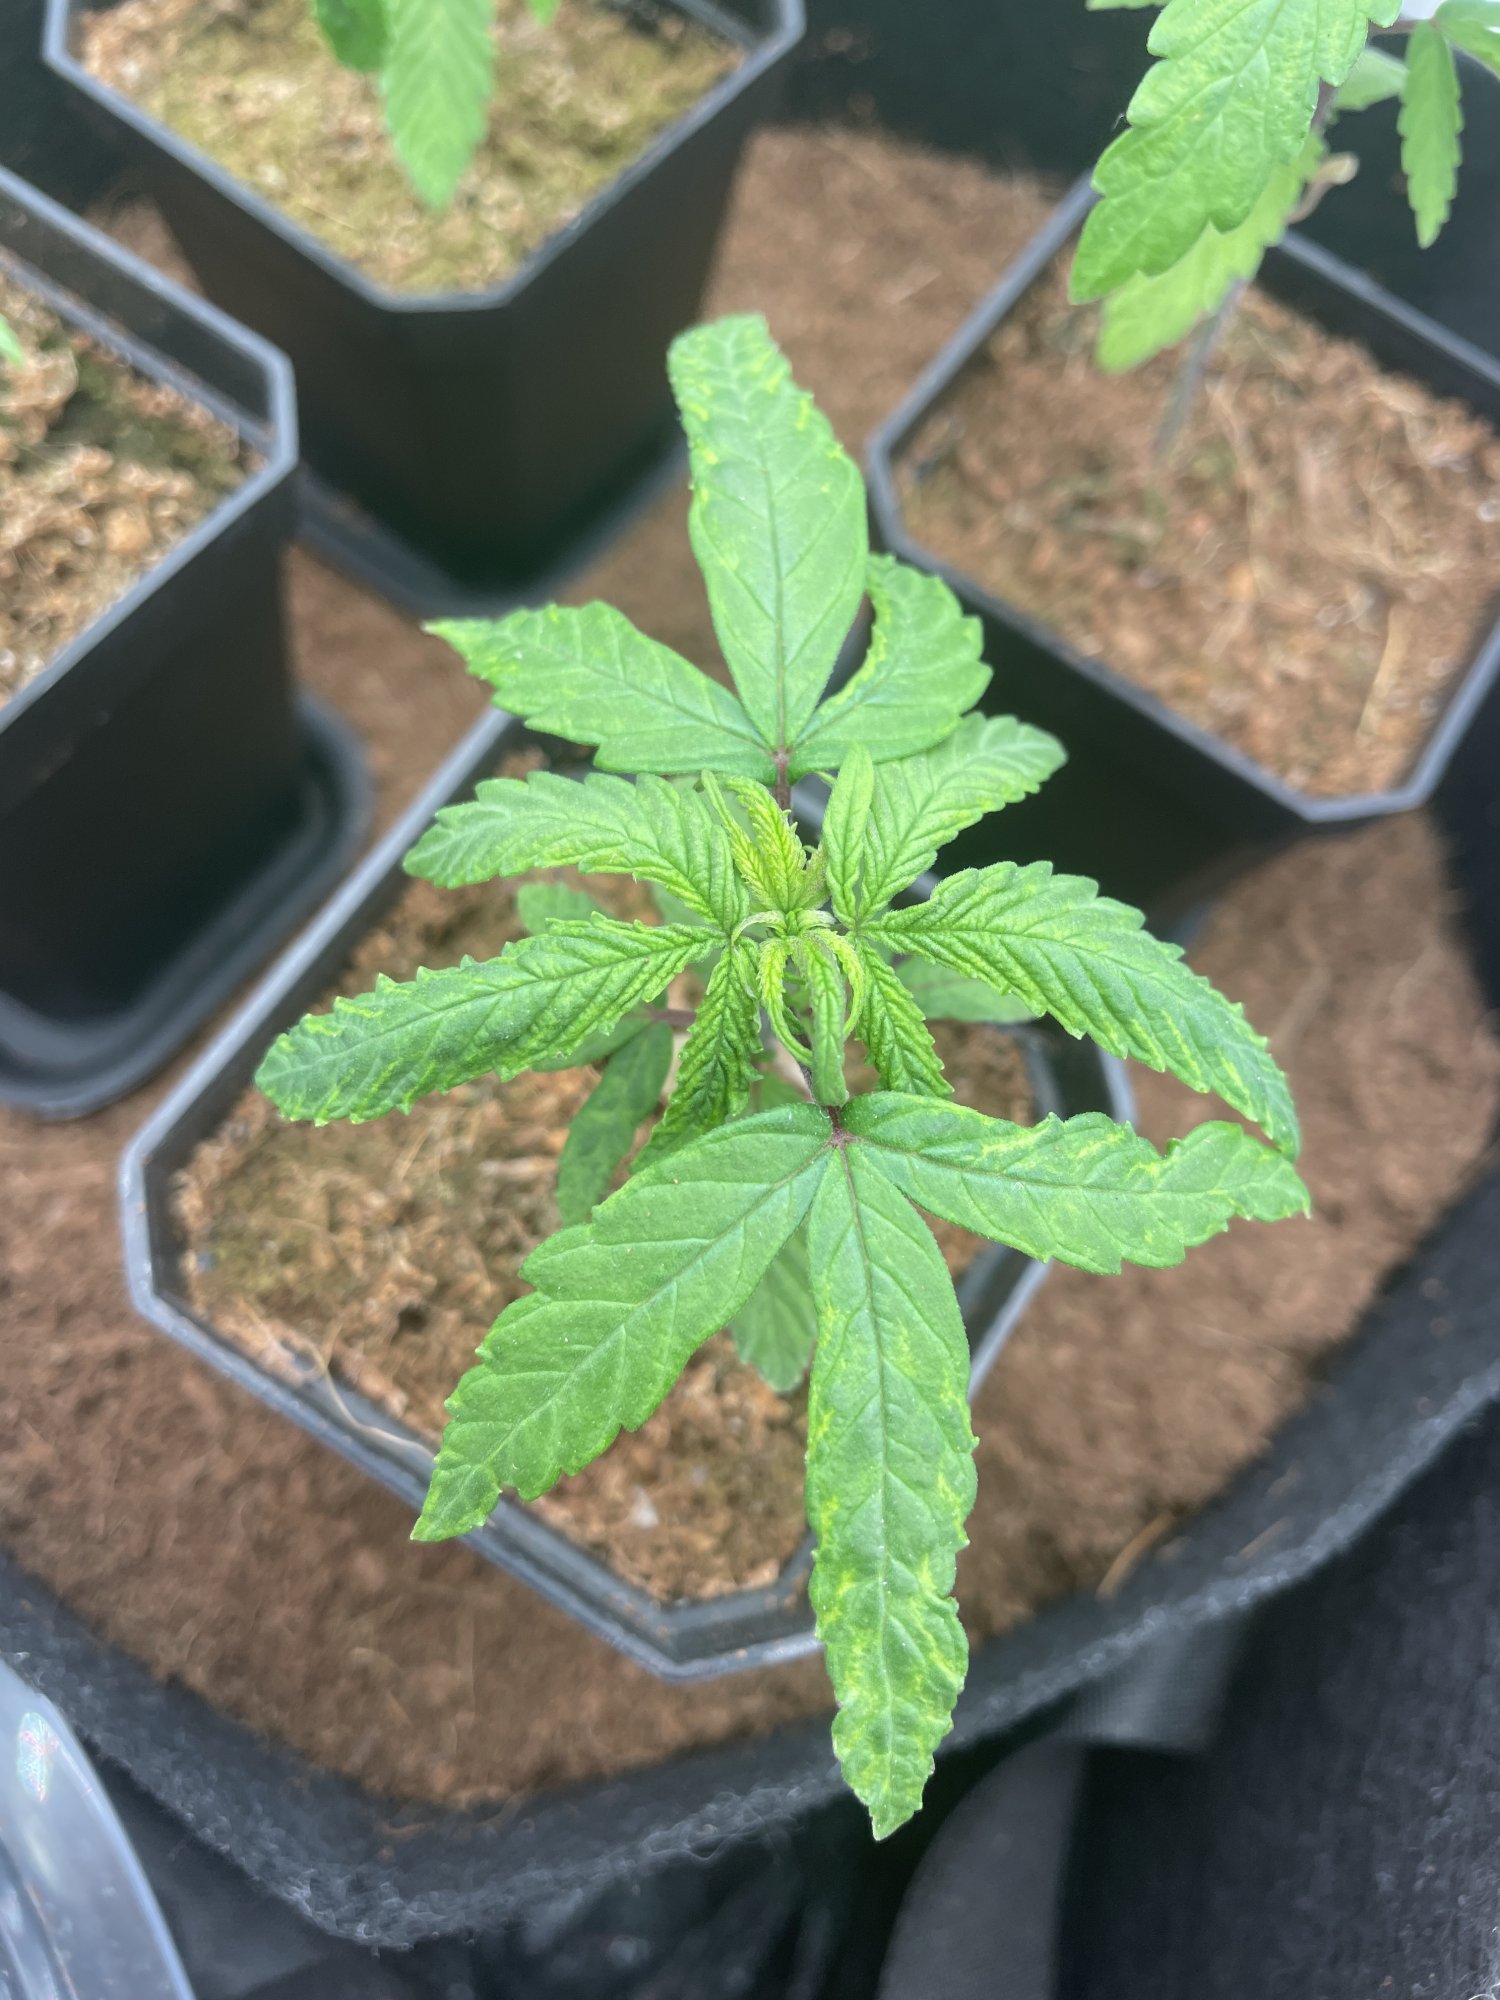 Problems with slow growth please help 2